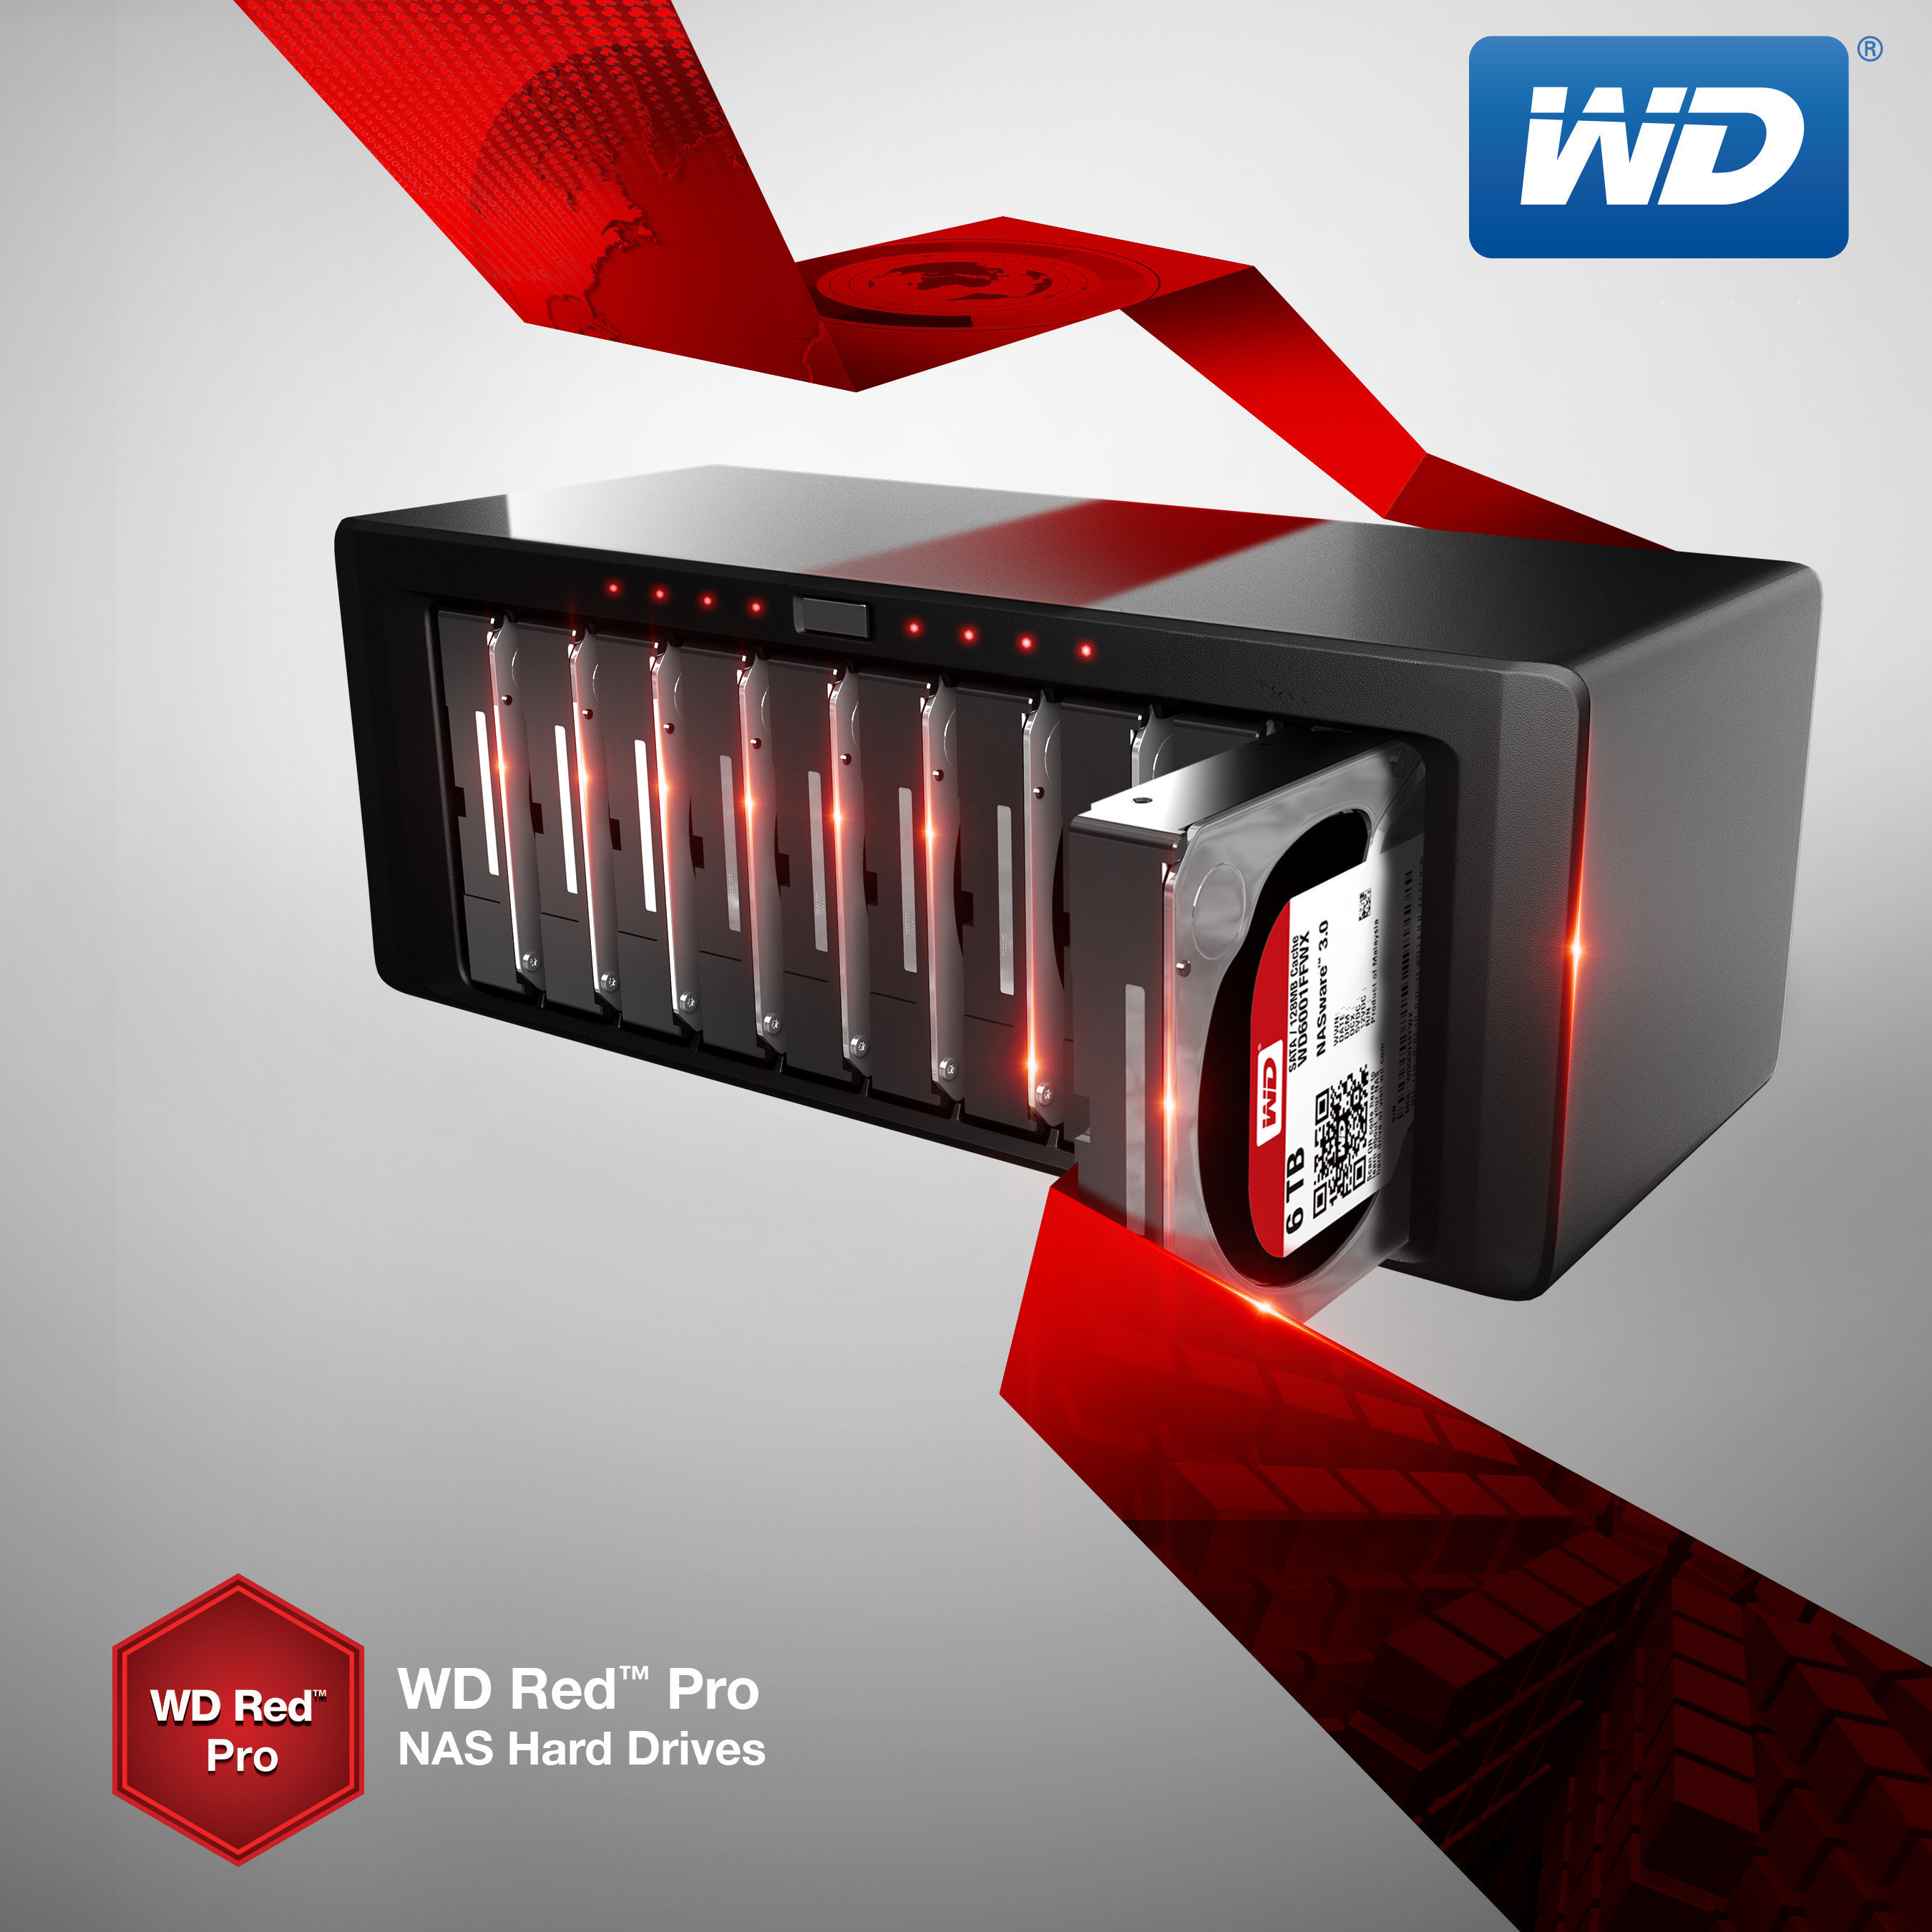 WD Red(TM) Pro Drives Now Available In 6 TB